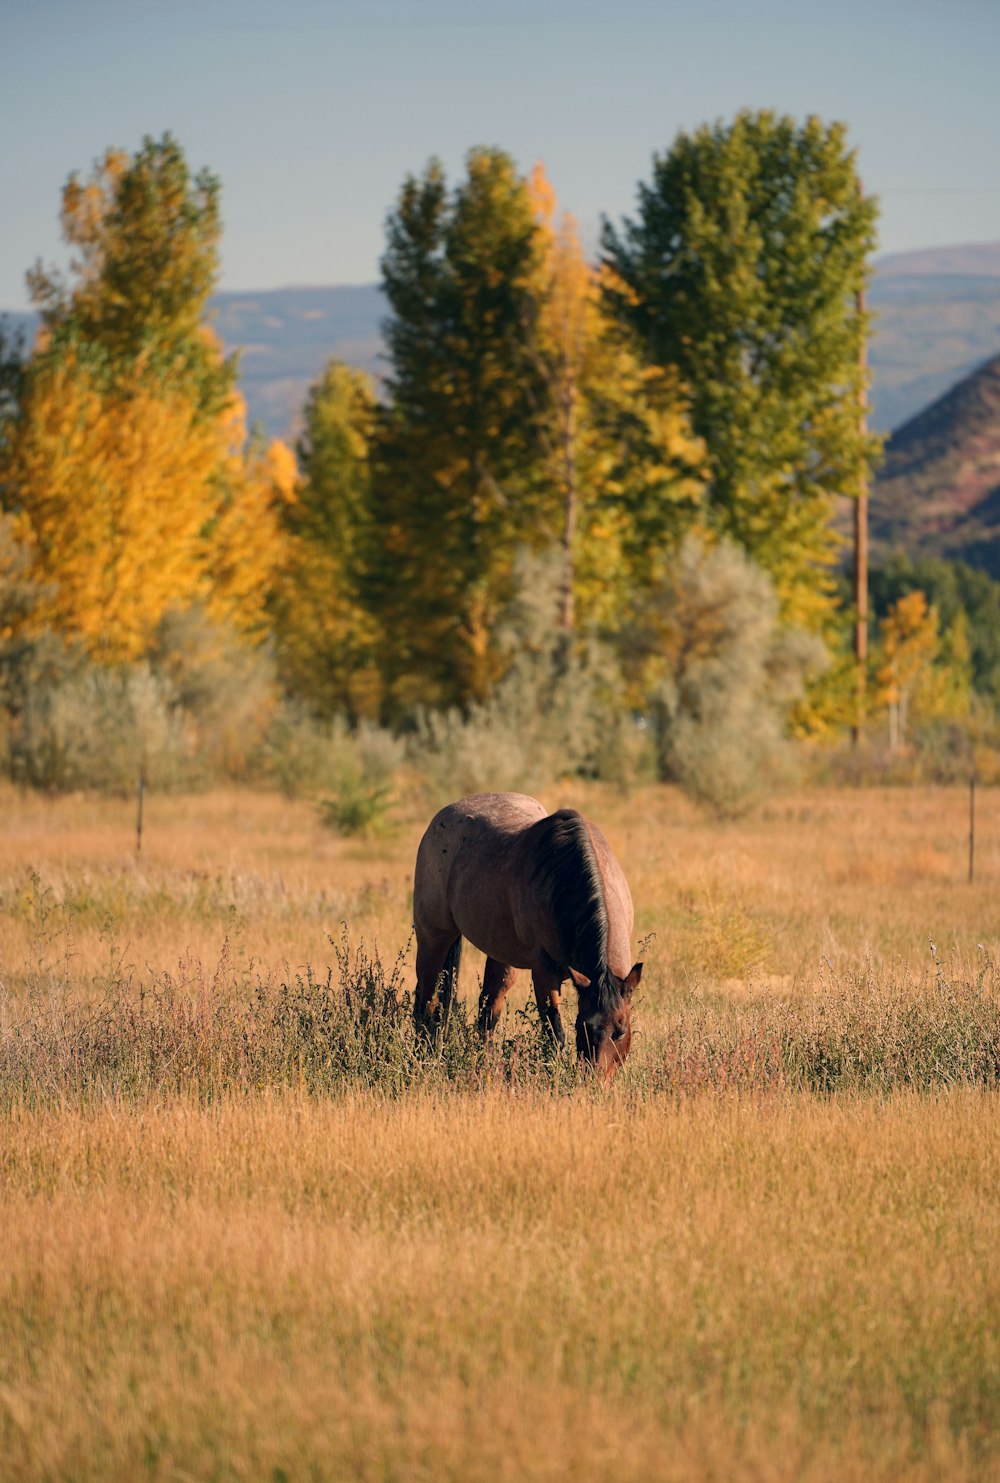 a horse grazing in a field with trees in the background